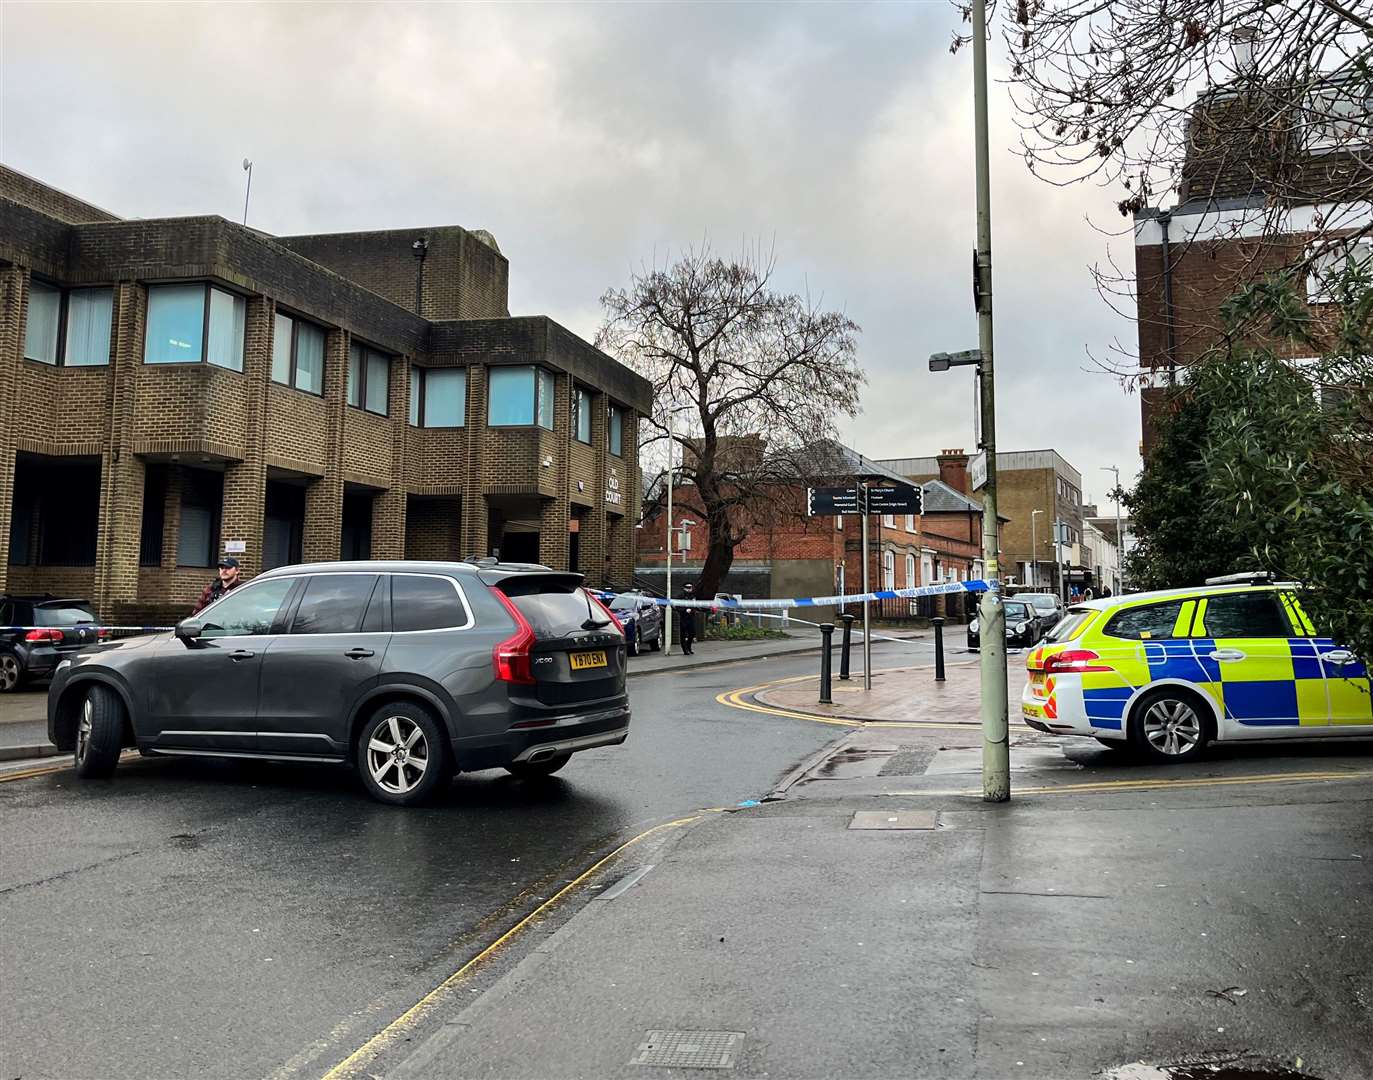 Police cordoned off Tufton Street, with an unmarked Volvo parked across the road